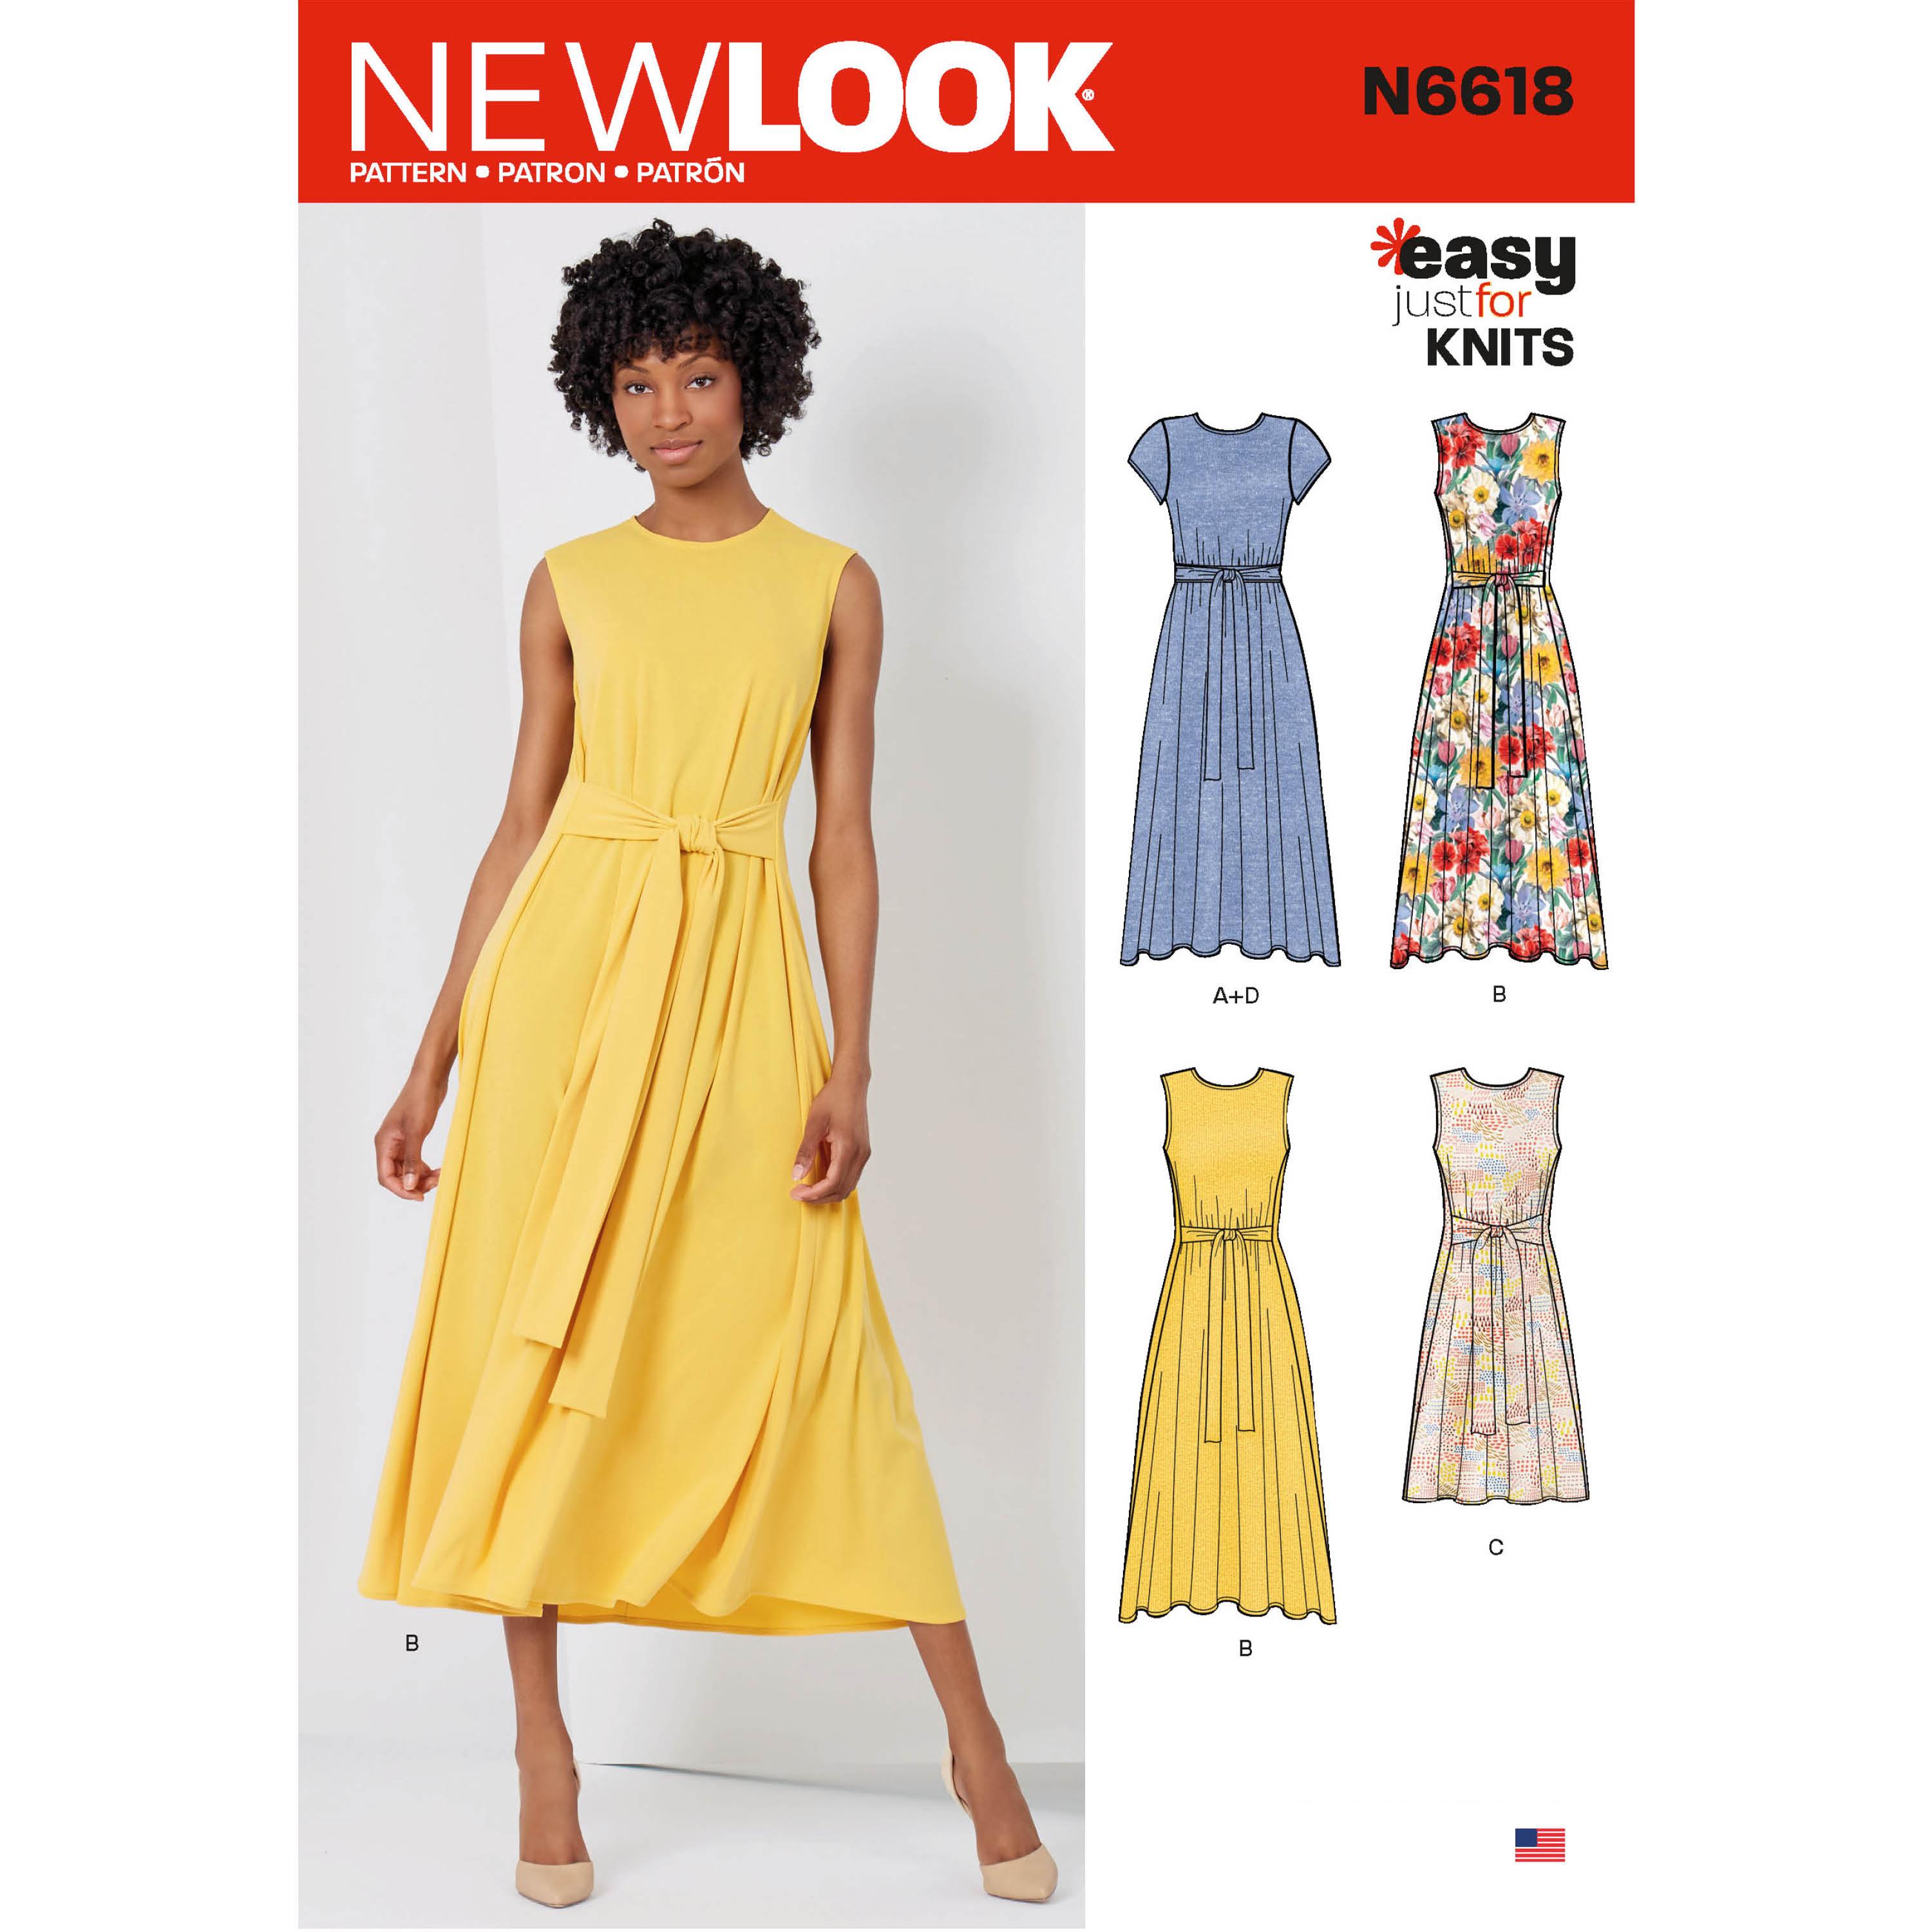 NewLook Sewing Pattern N6618 Misses' Dresses In Two Lengths